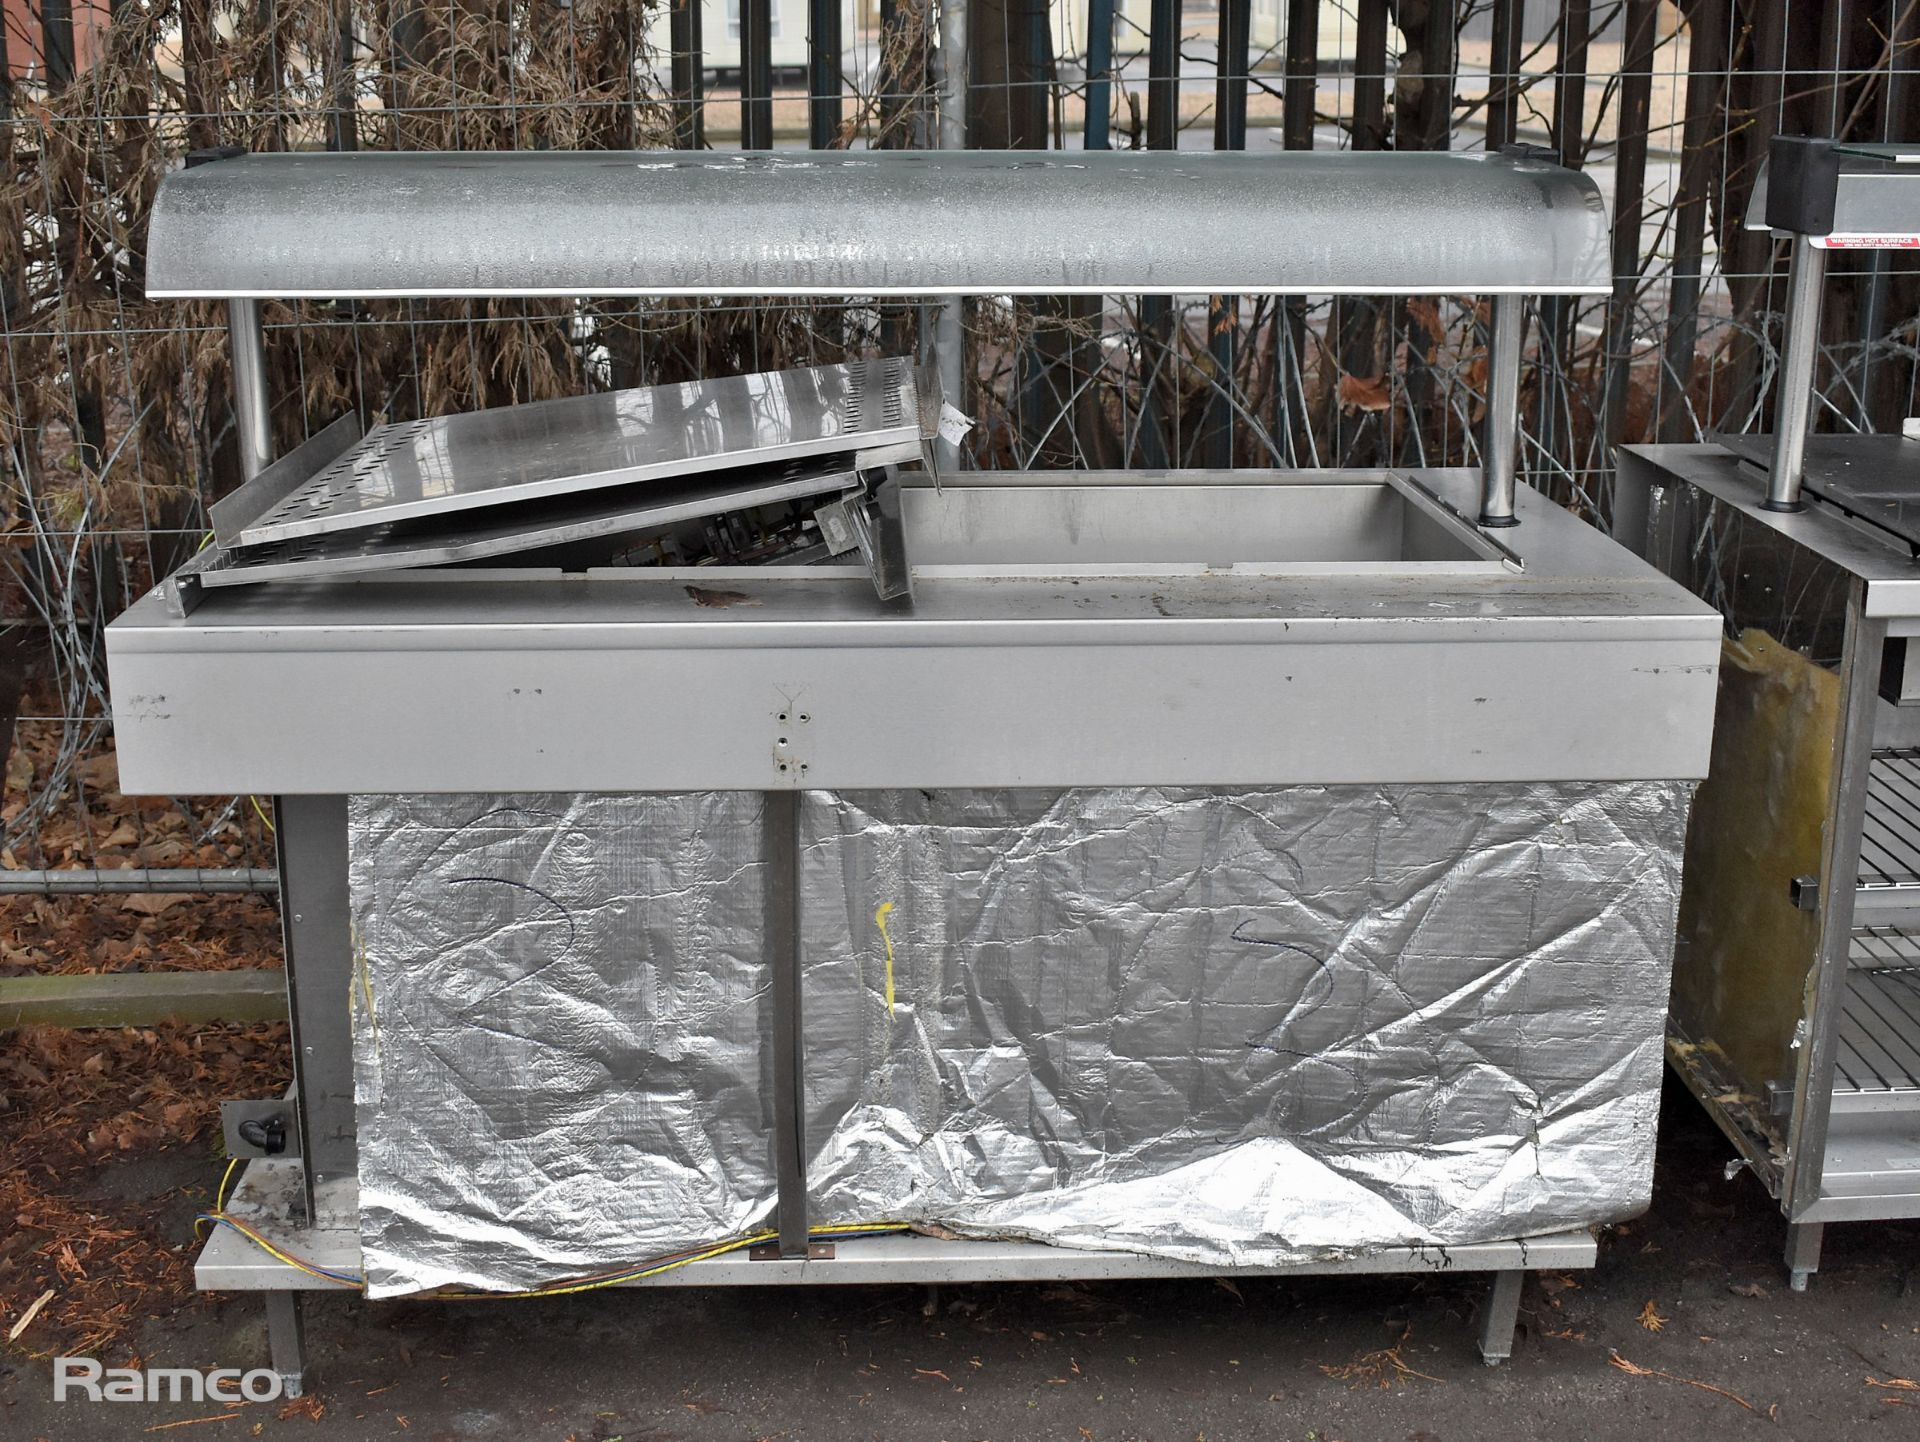 Moffat stainless steel bain marie with heated gantry - L155 x W80 x H132cm - Image 2 of 17